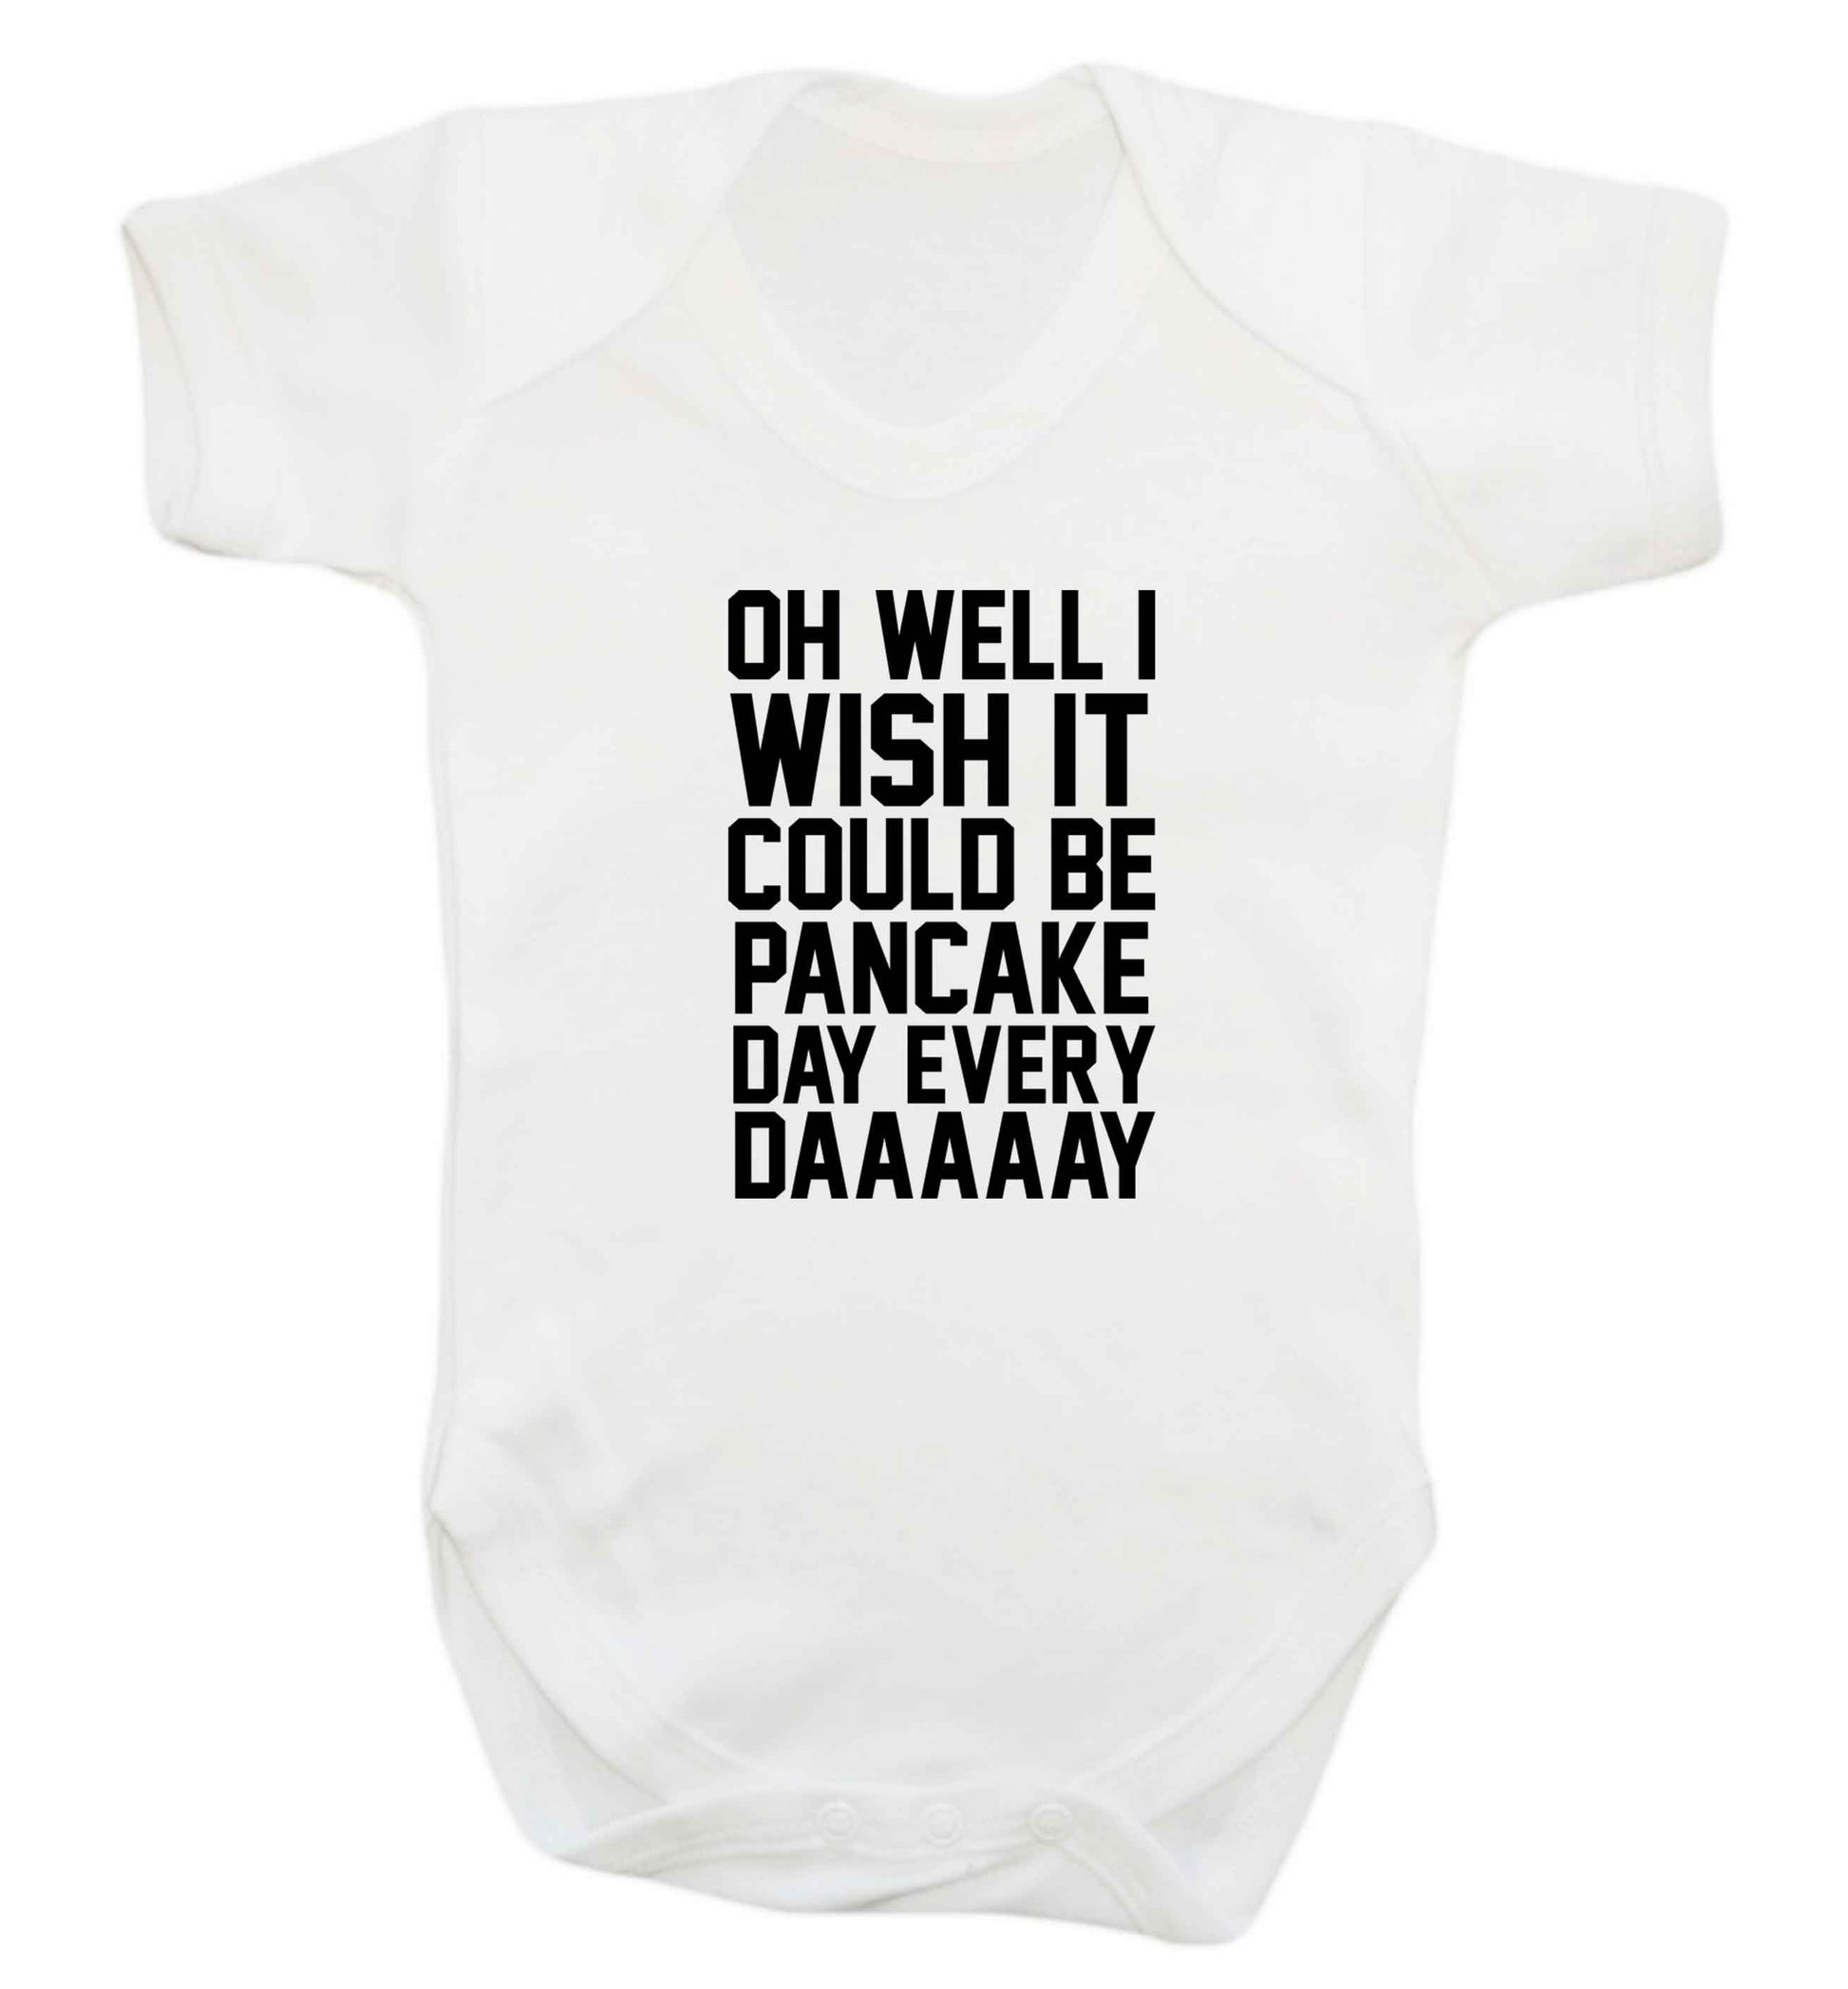 Oh well I wish it could be pancake day every day baby vest white 18-24 months